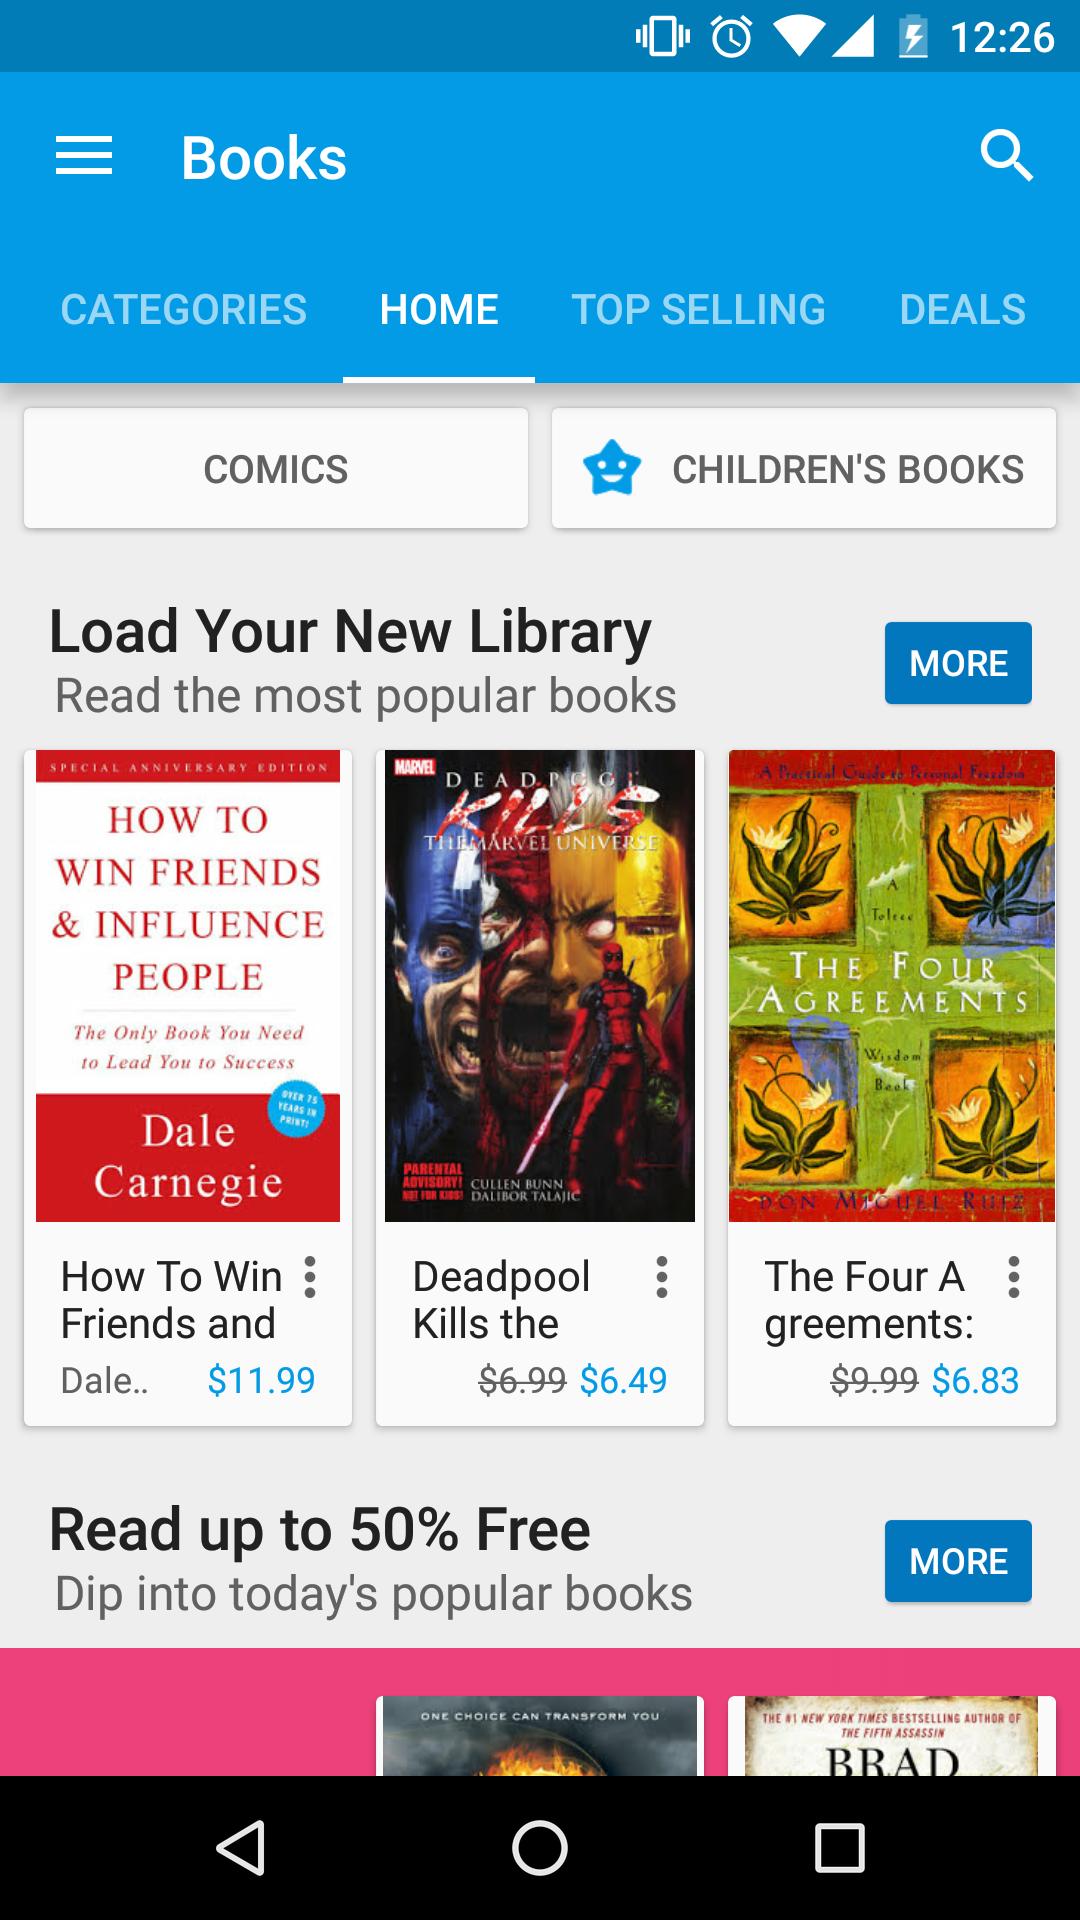 Google play store apk download for android tablet 4.0